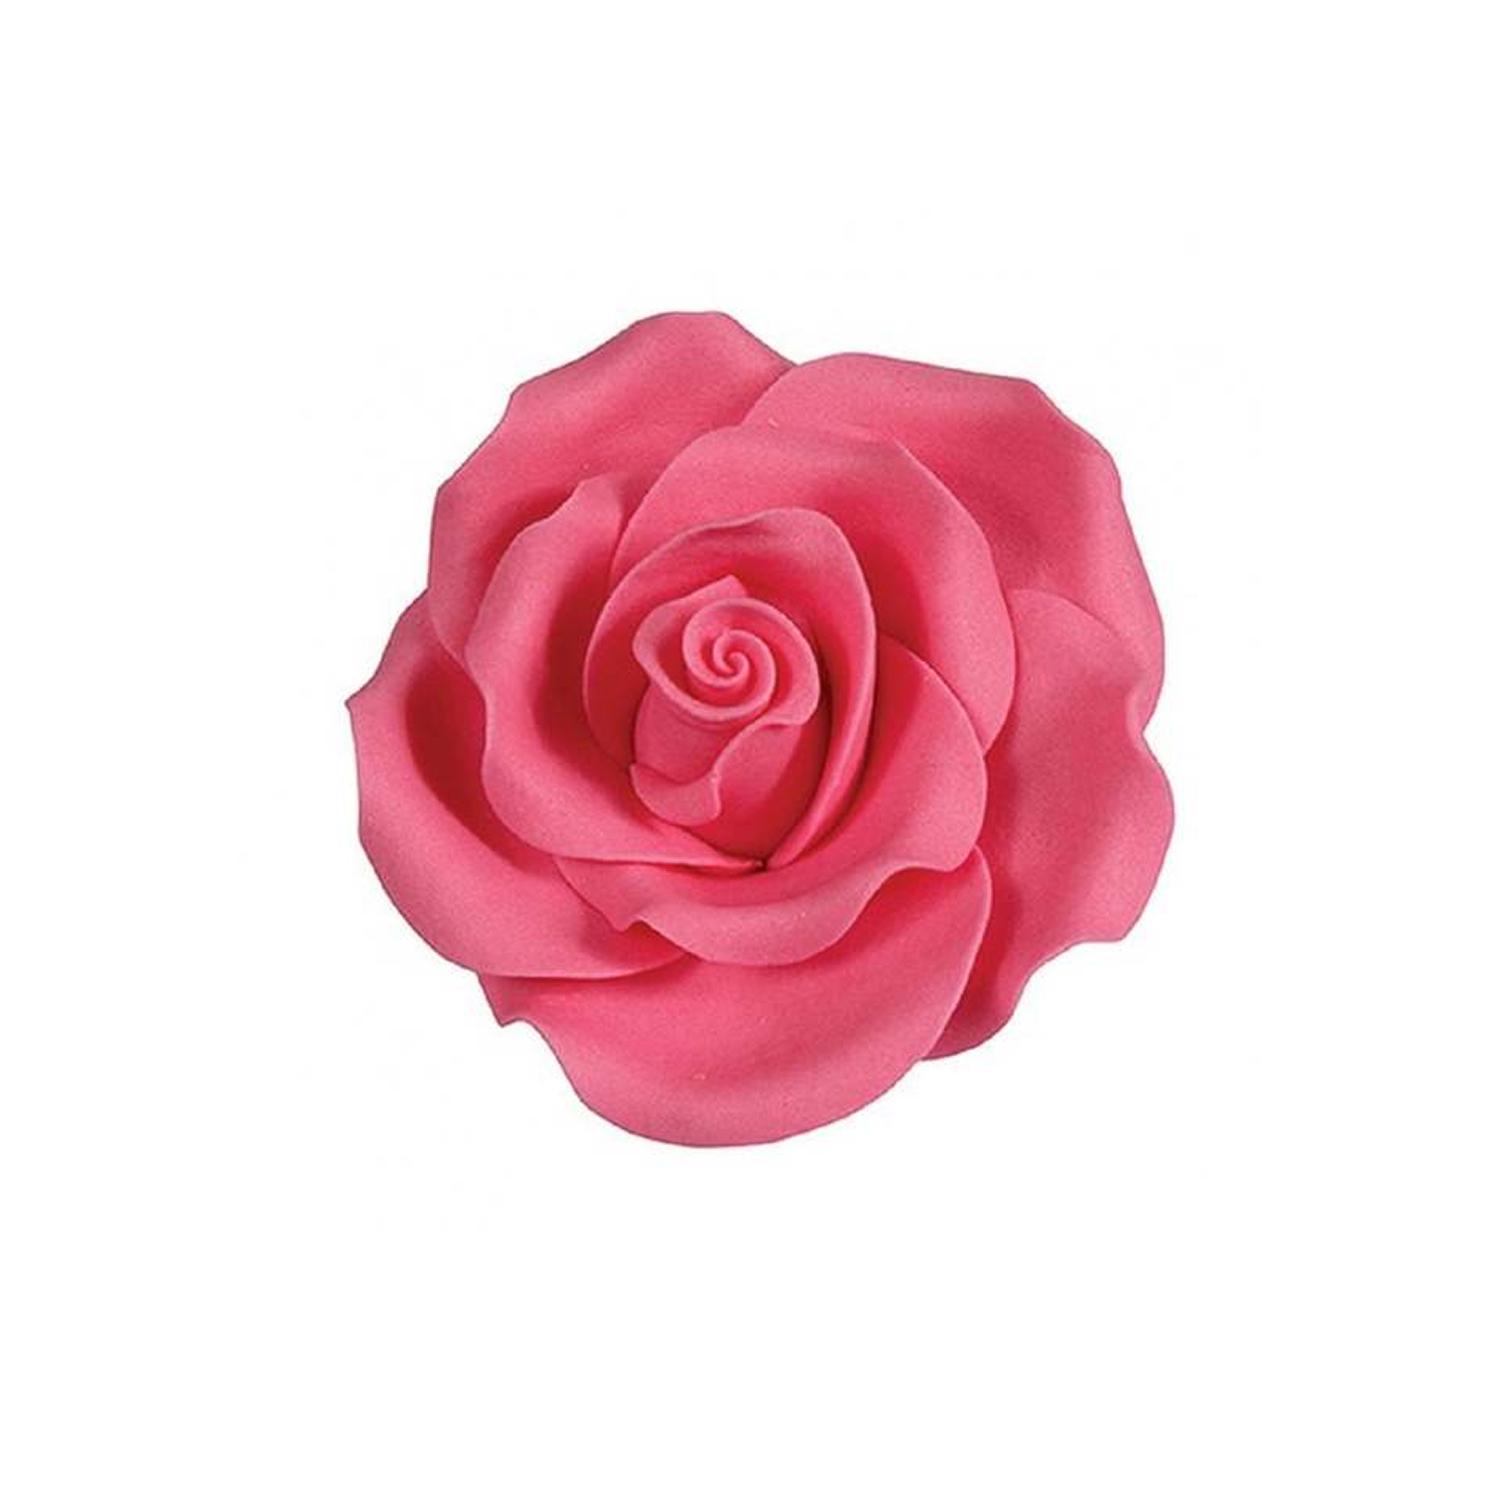 SUPER CAKES SMALL ROSE FLOWERS HOT PINK